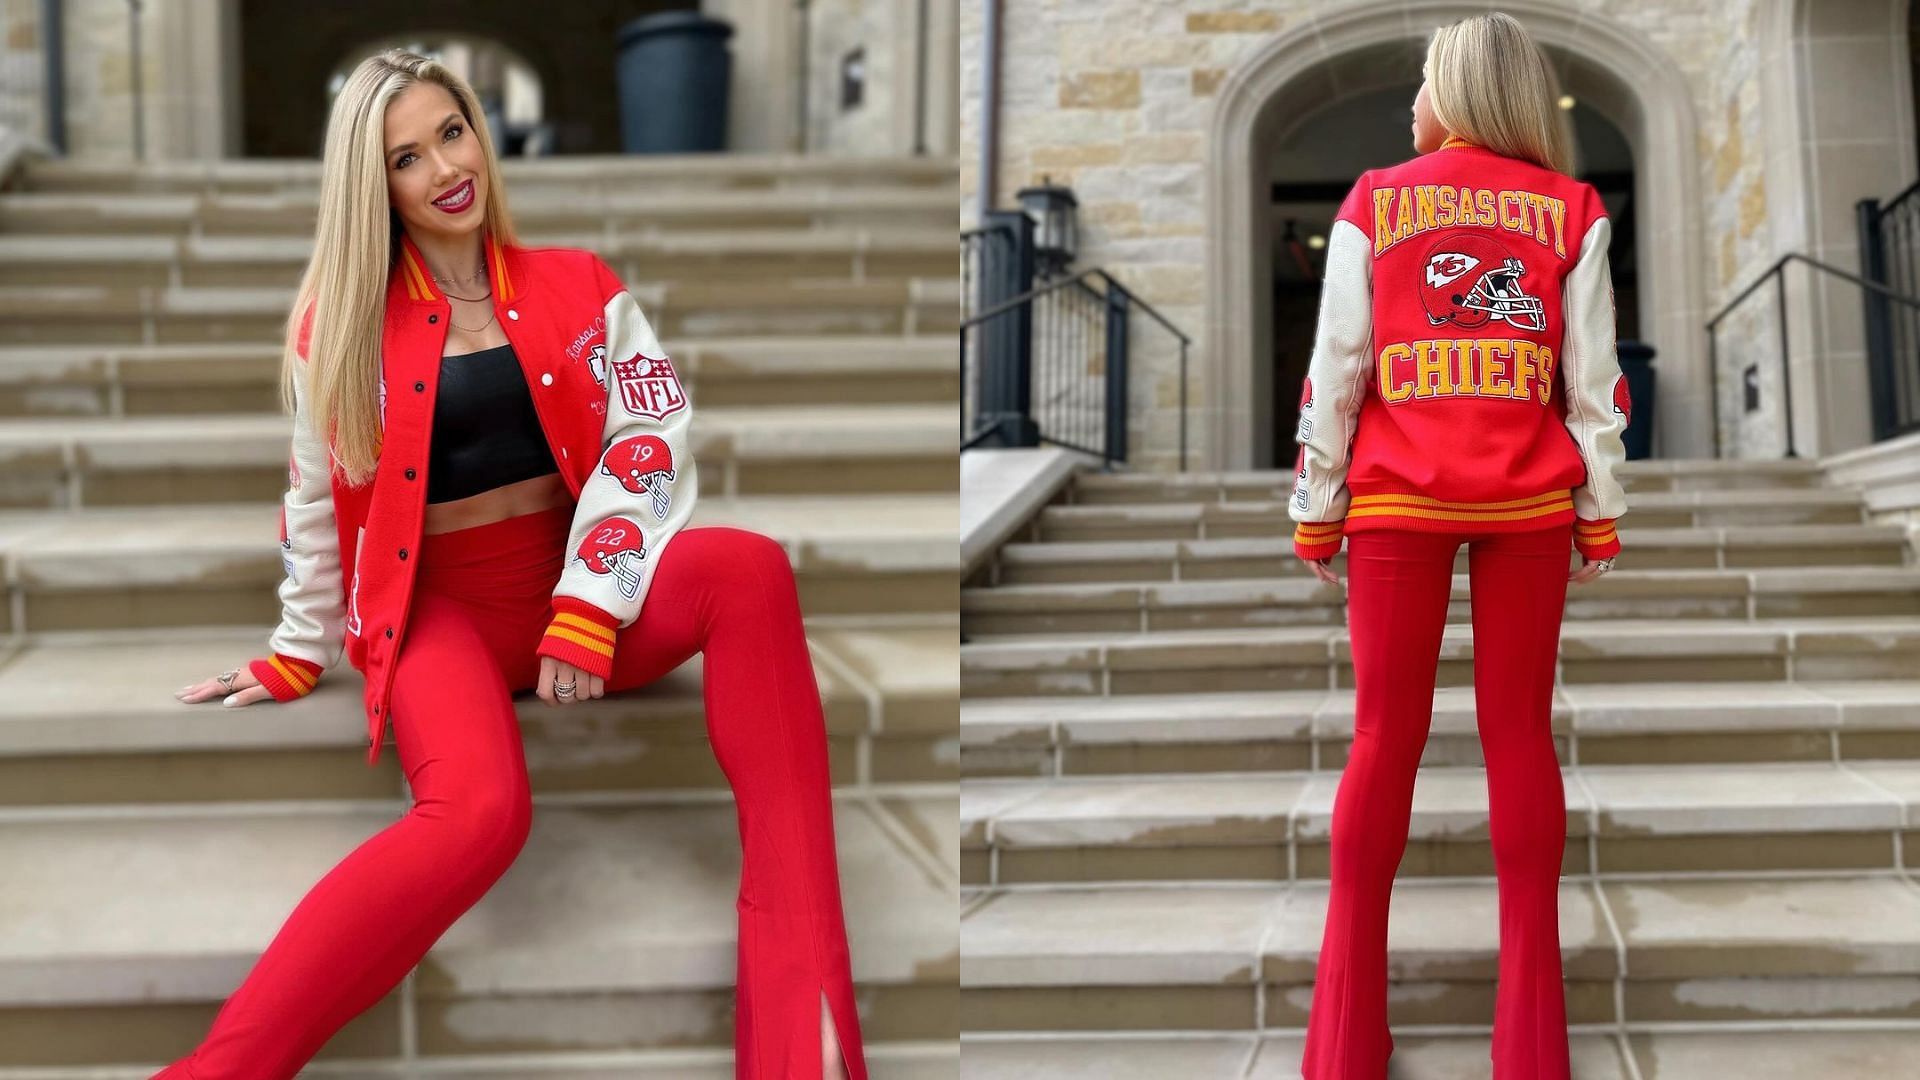 Gracie Hunt expressed her support for the Kansas City Chiefs days before the AFC Championship Game.